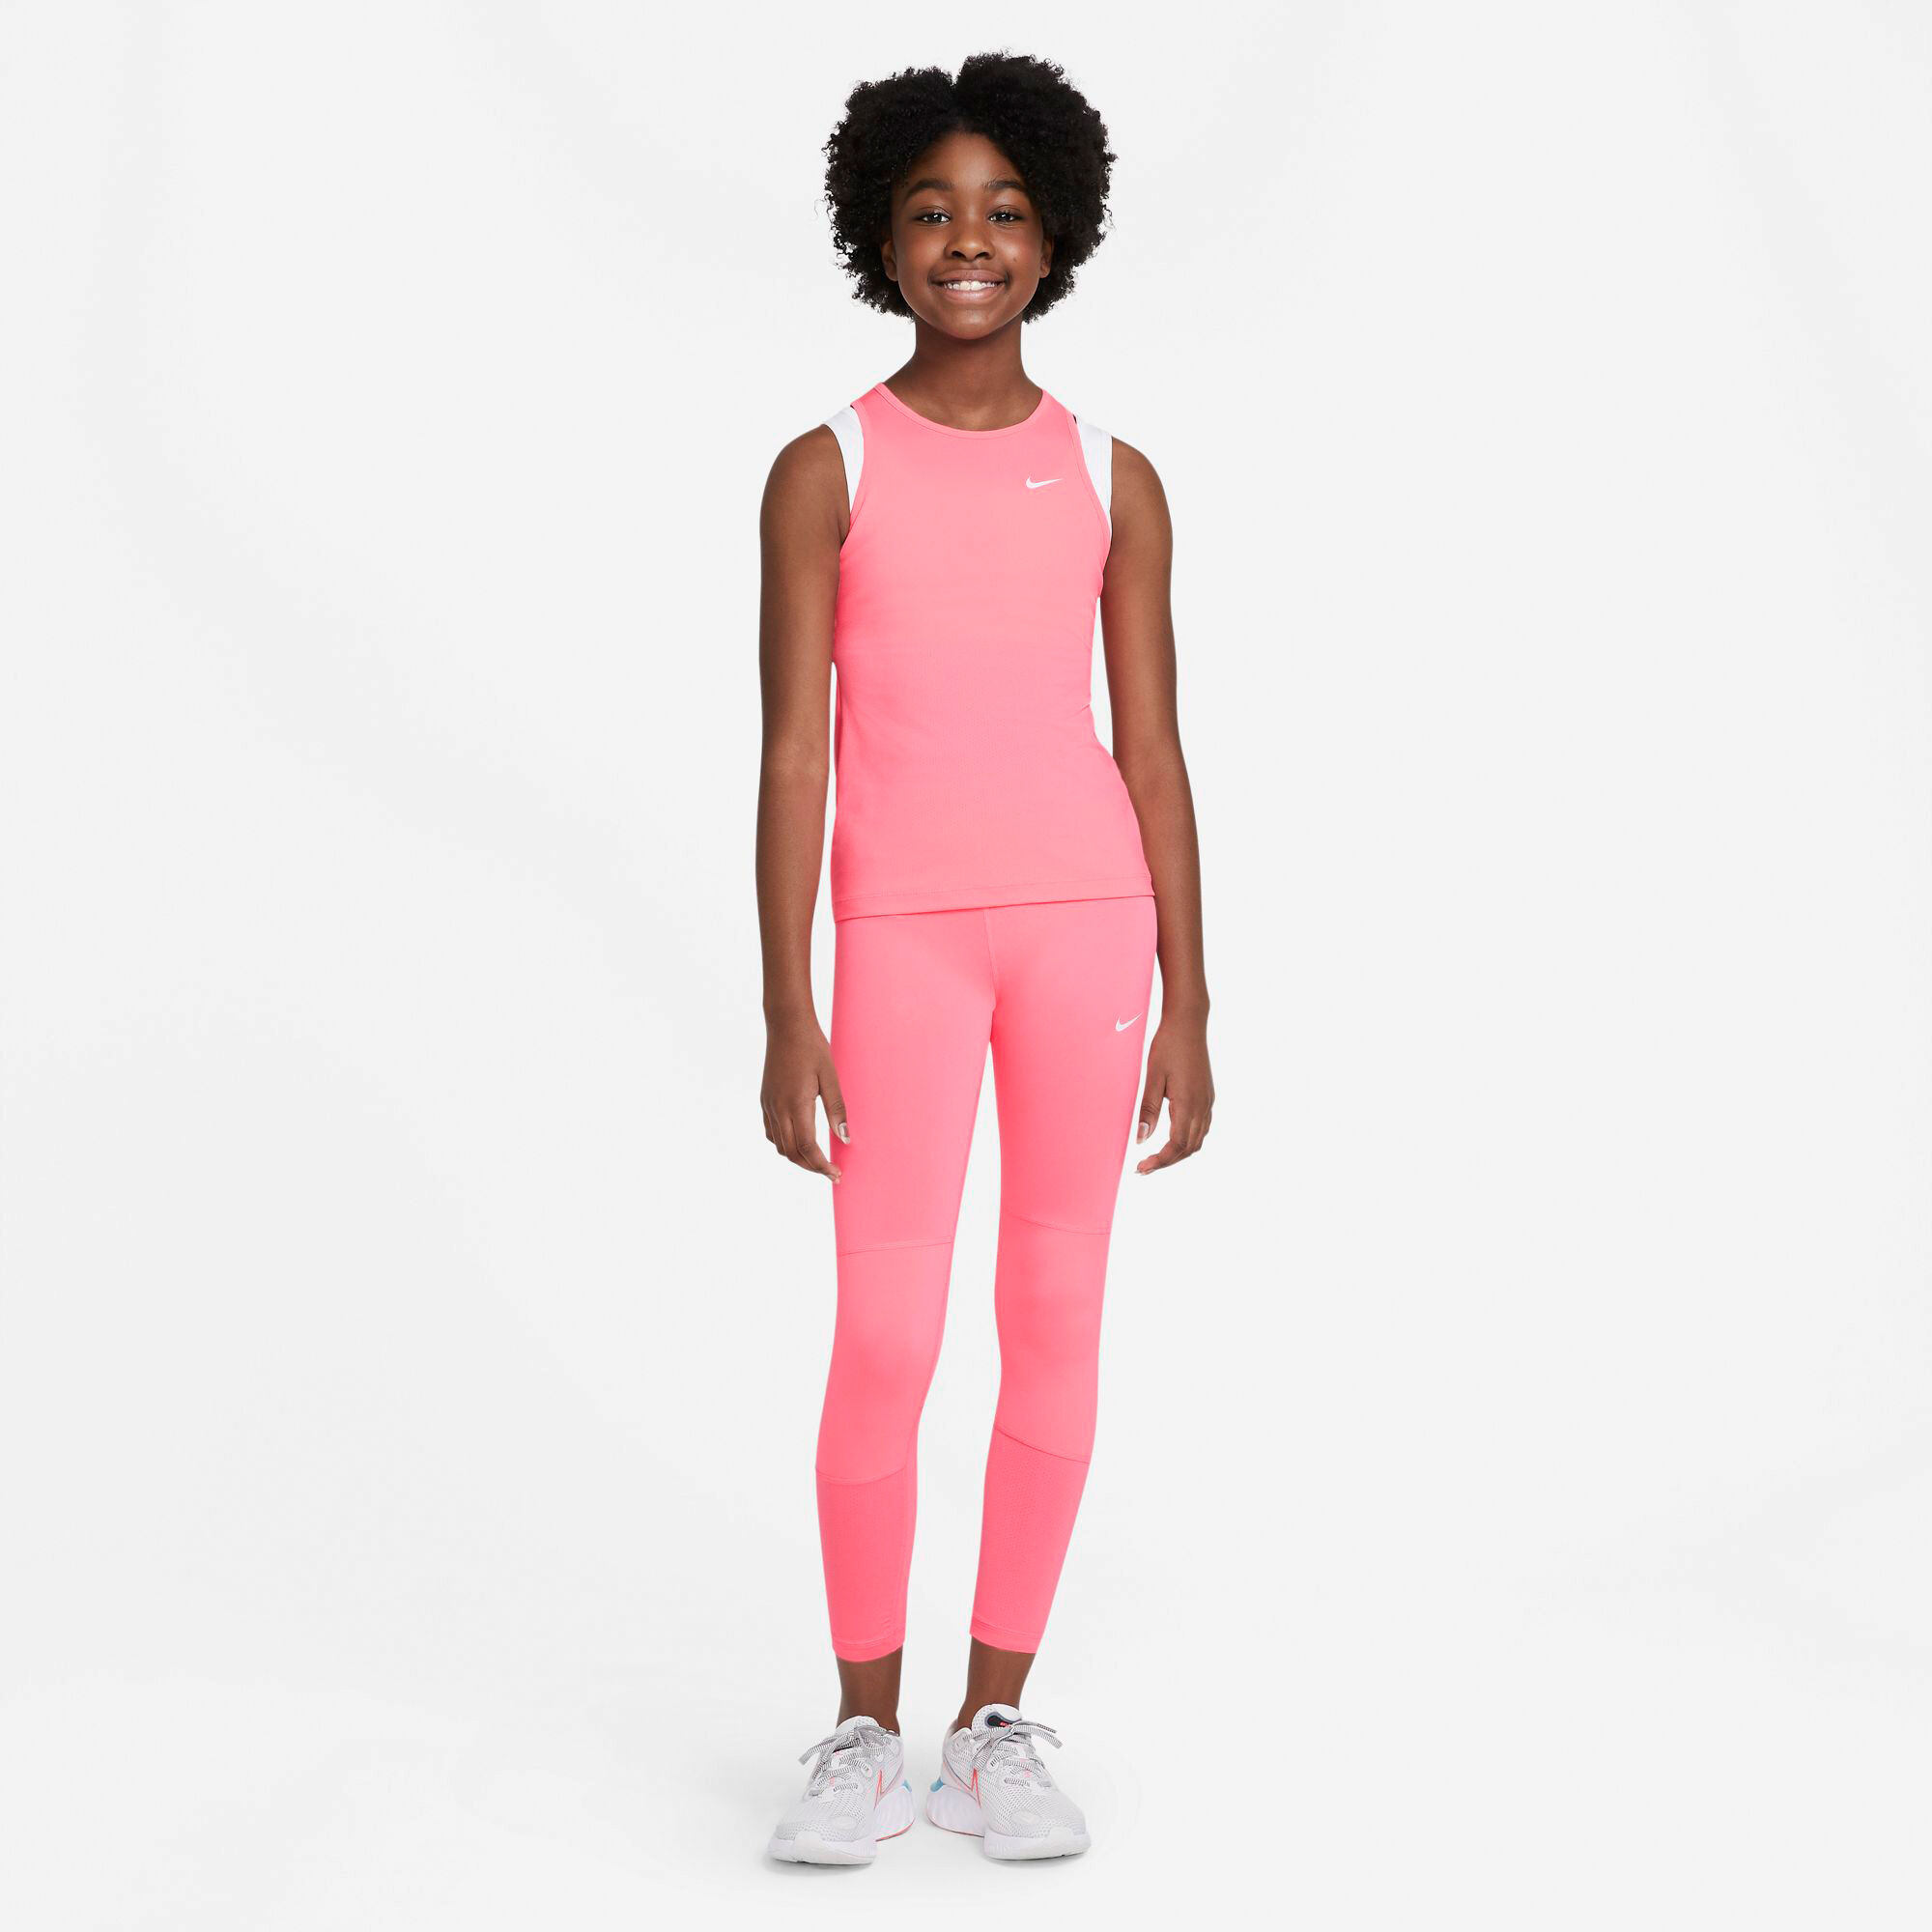 buy Nike Pro Tight Girls - Coral, Black online | Tennis-Point